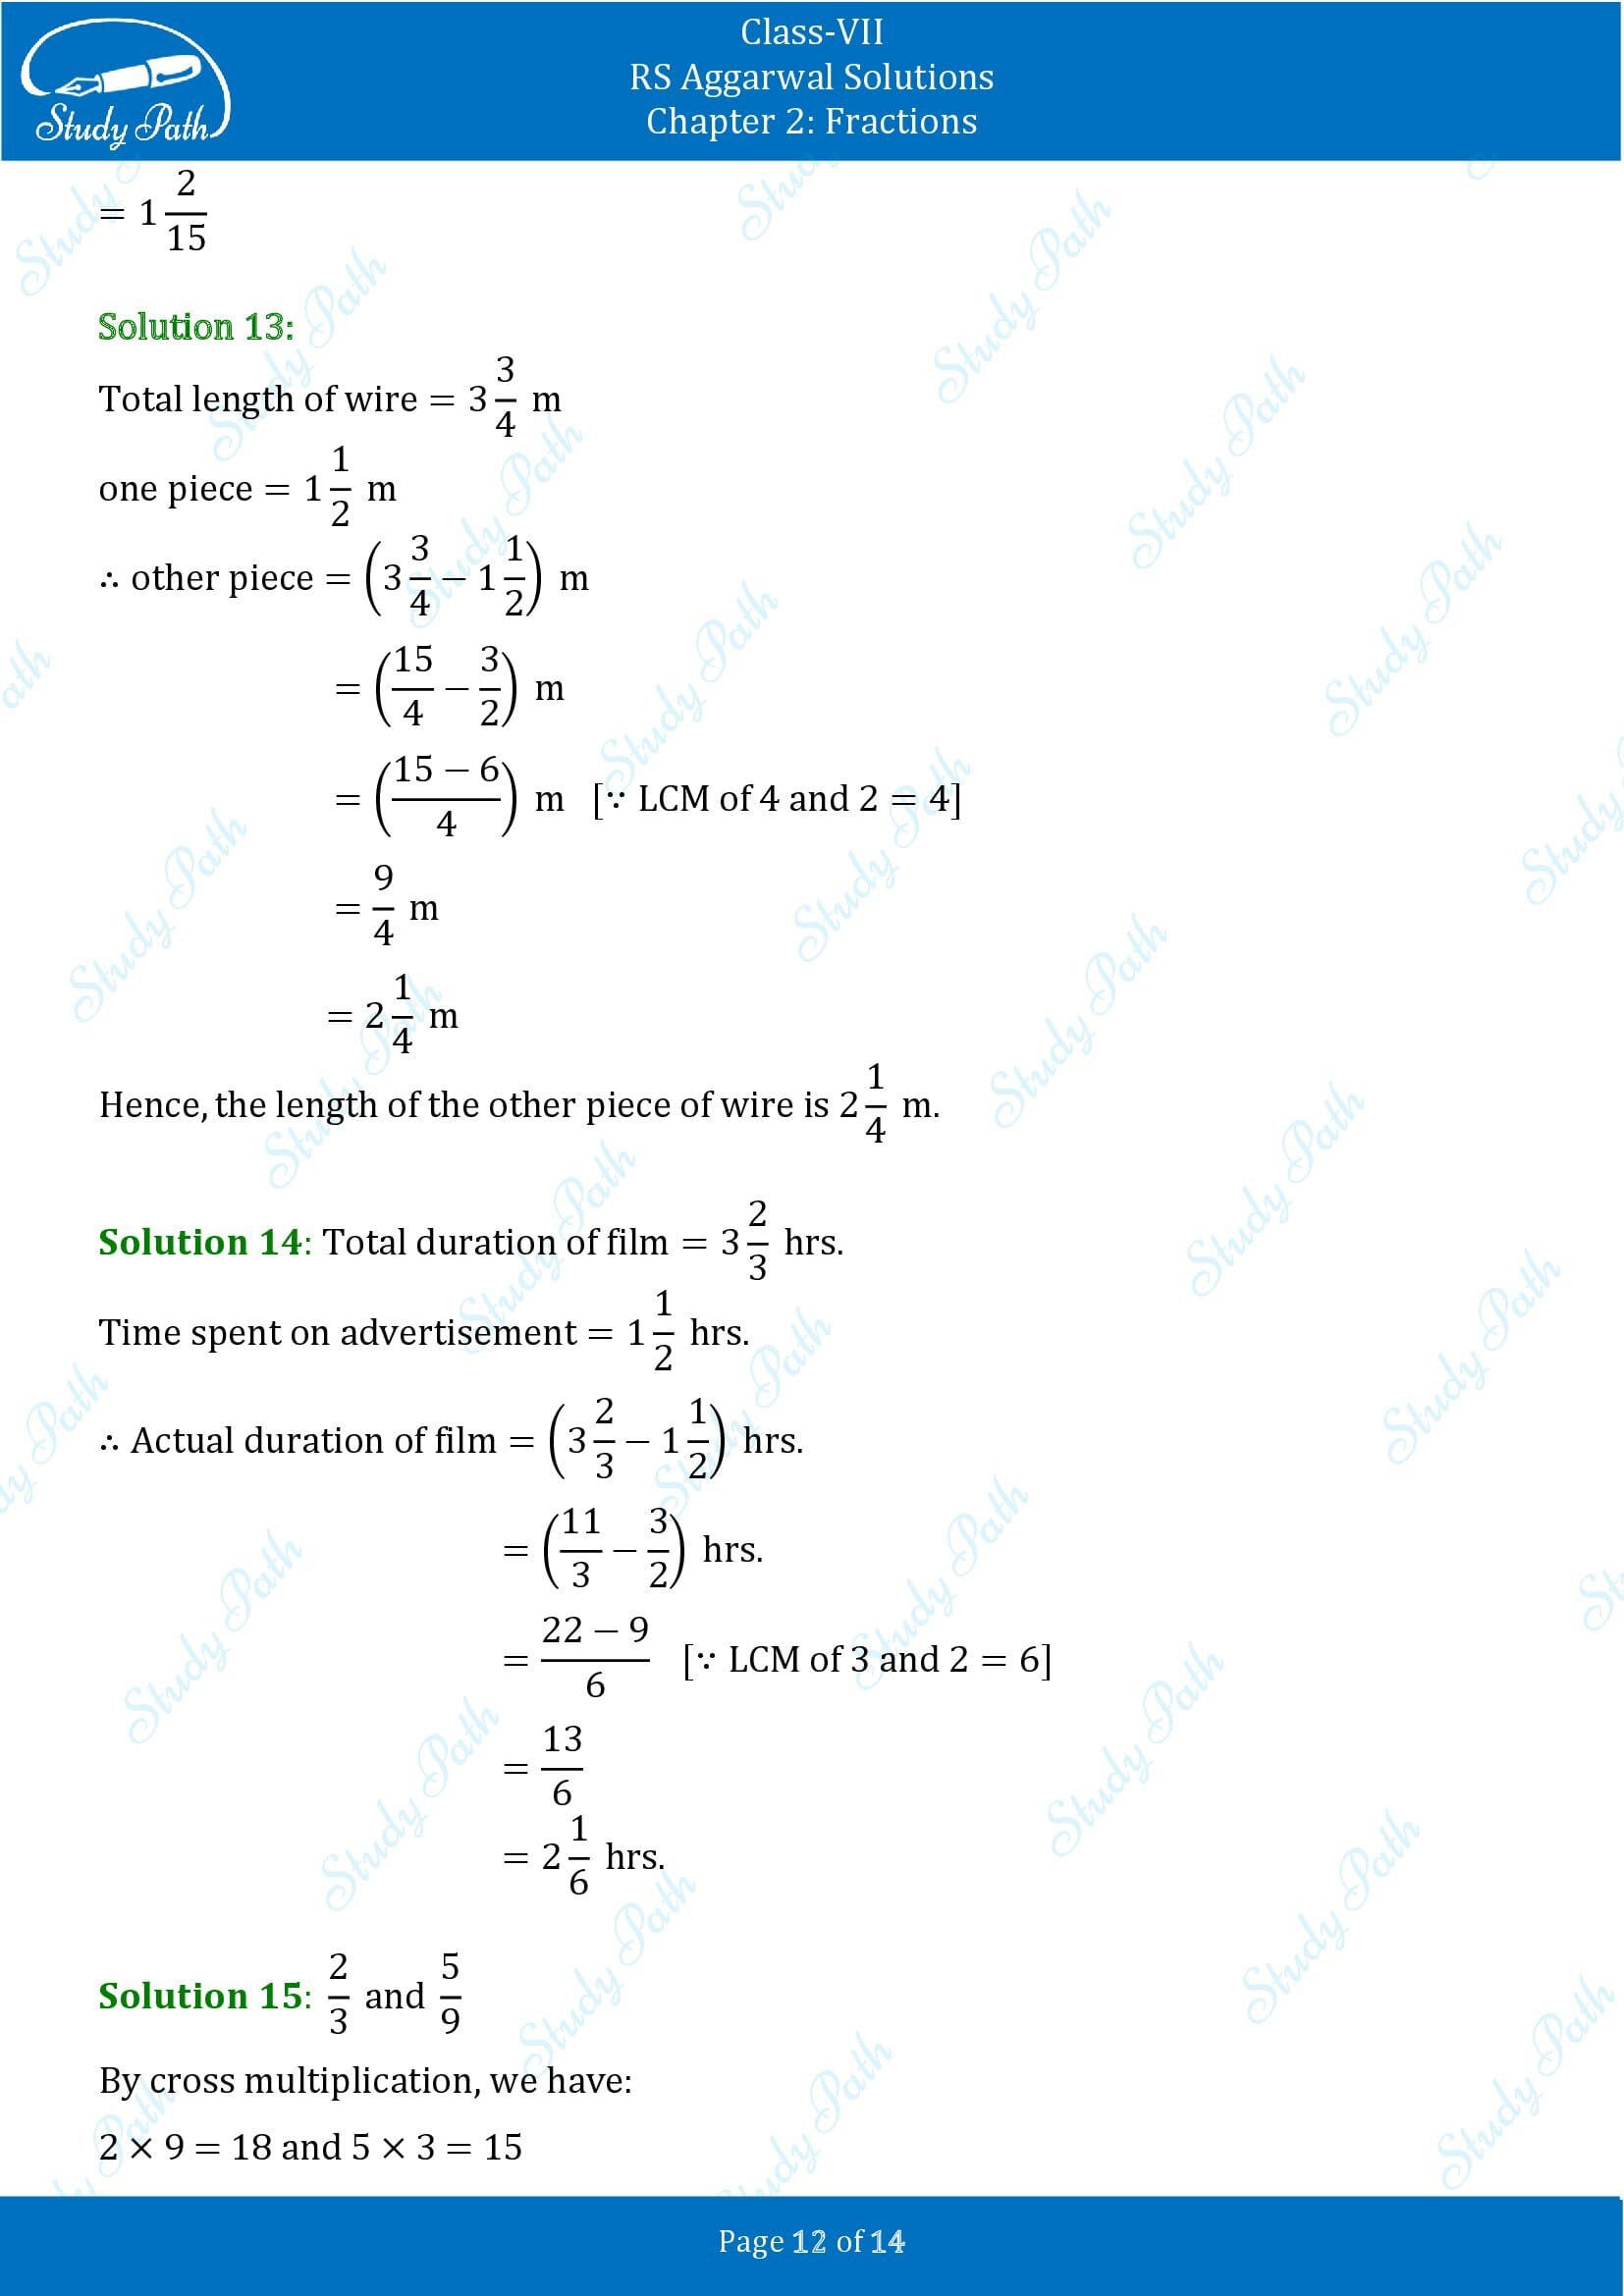 RS Aggarwal Solutions Class 7 Chapter 2 Fractions Exercise 2A 00012